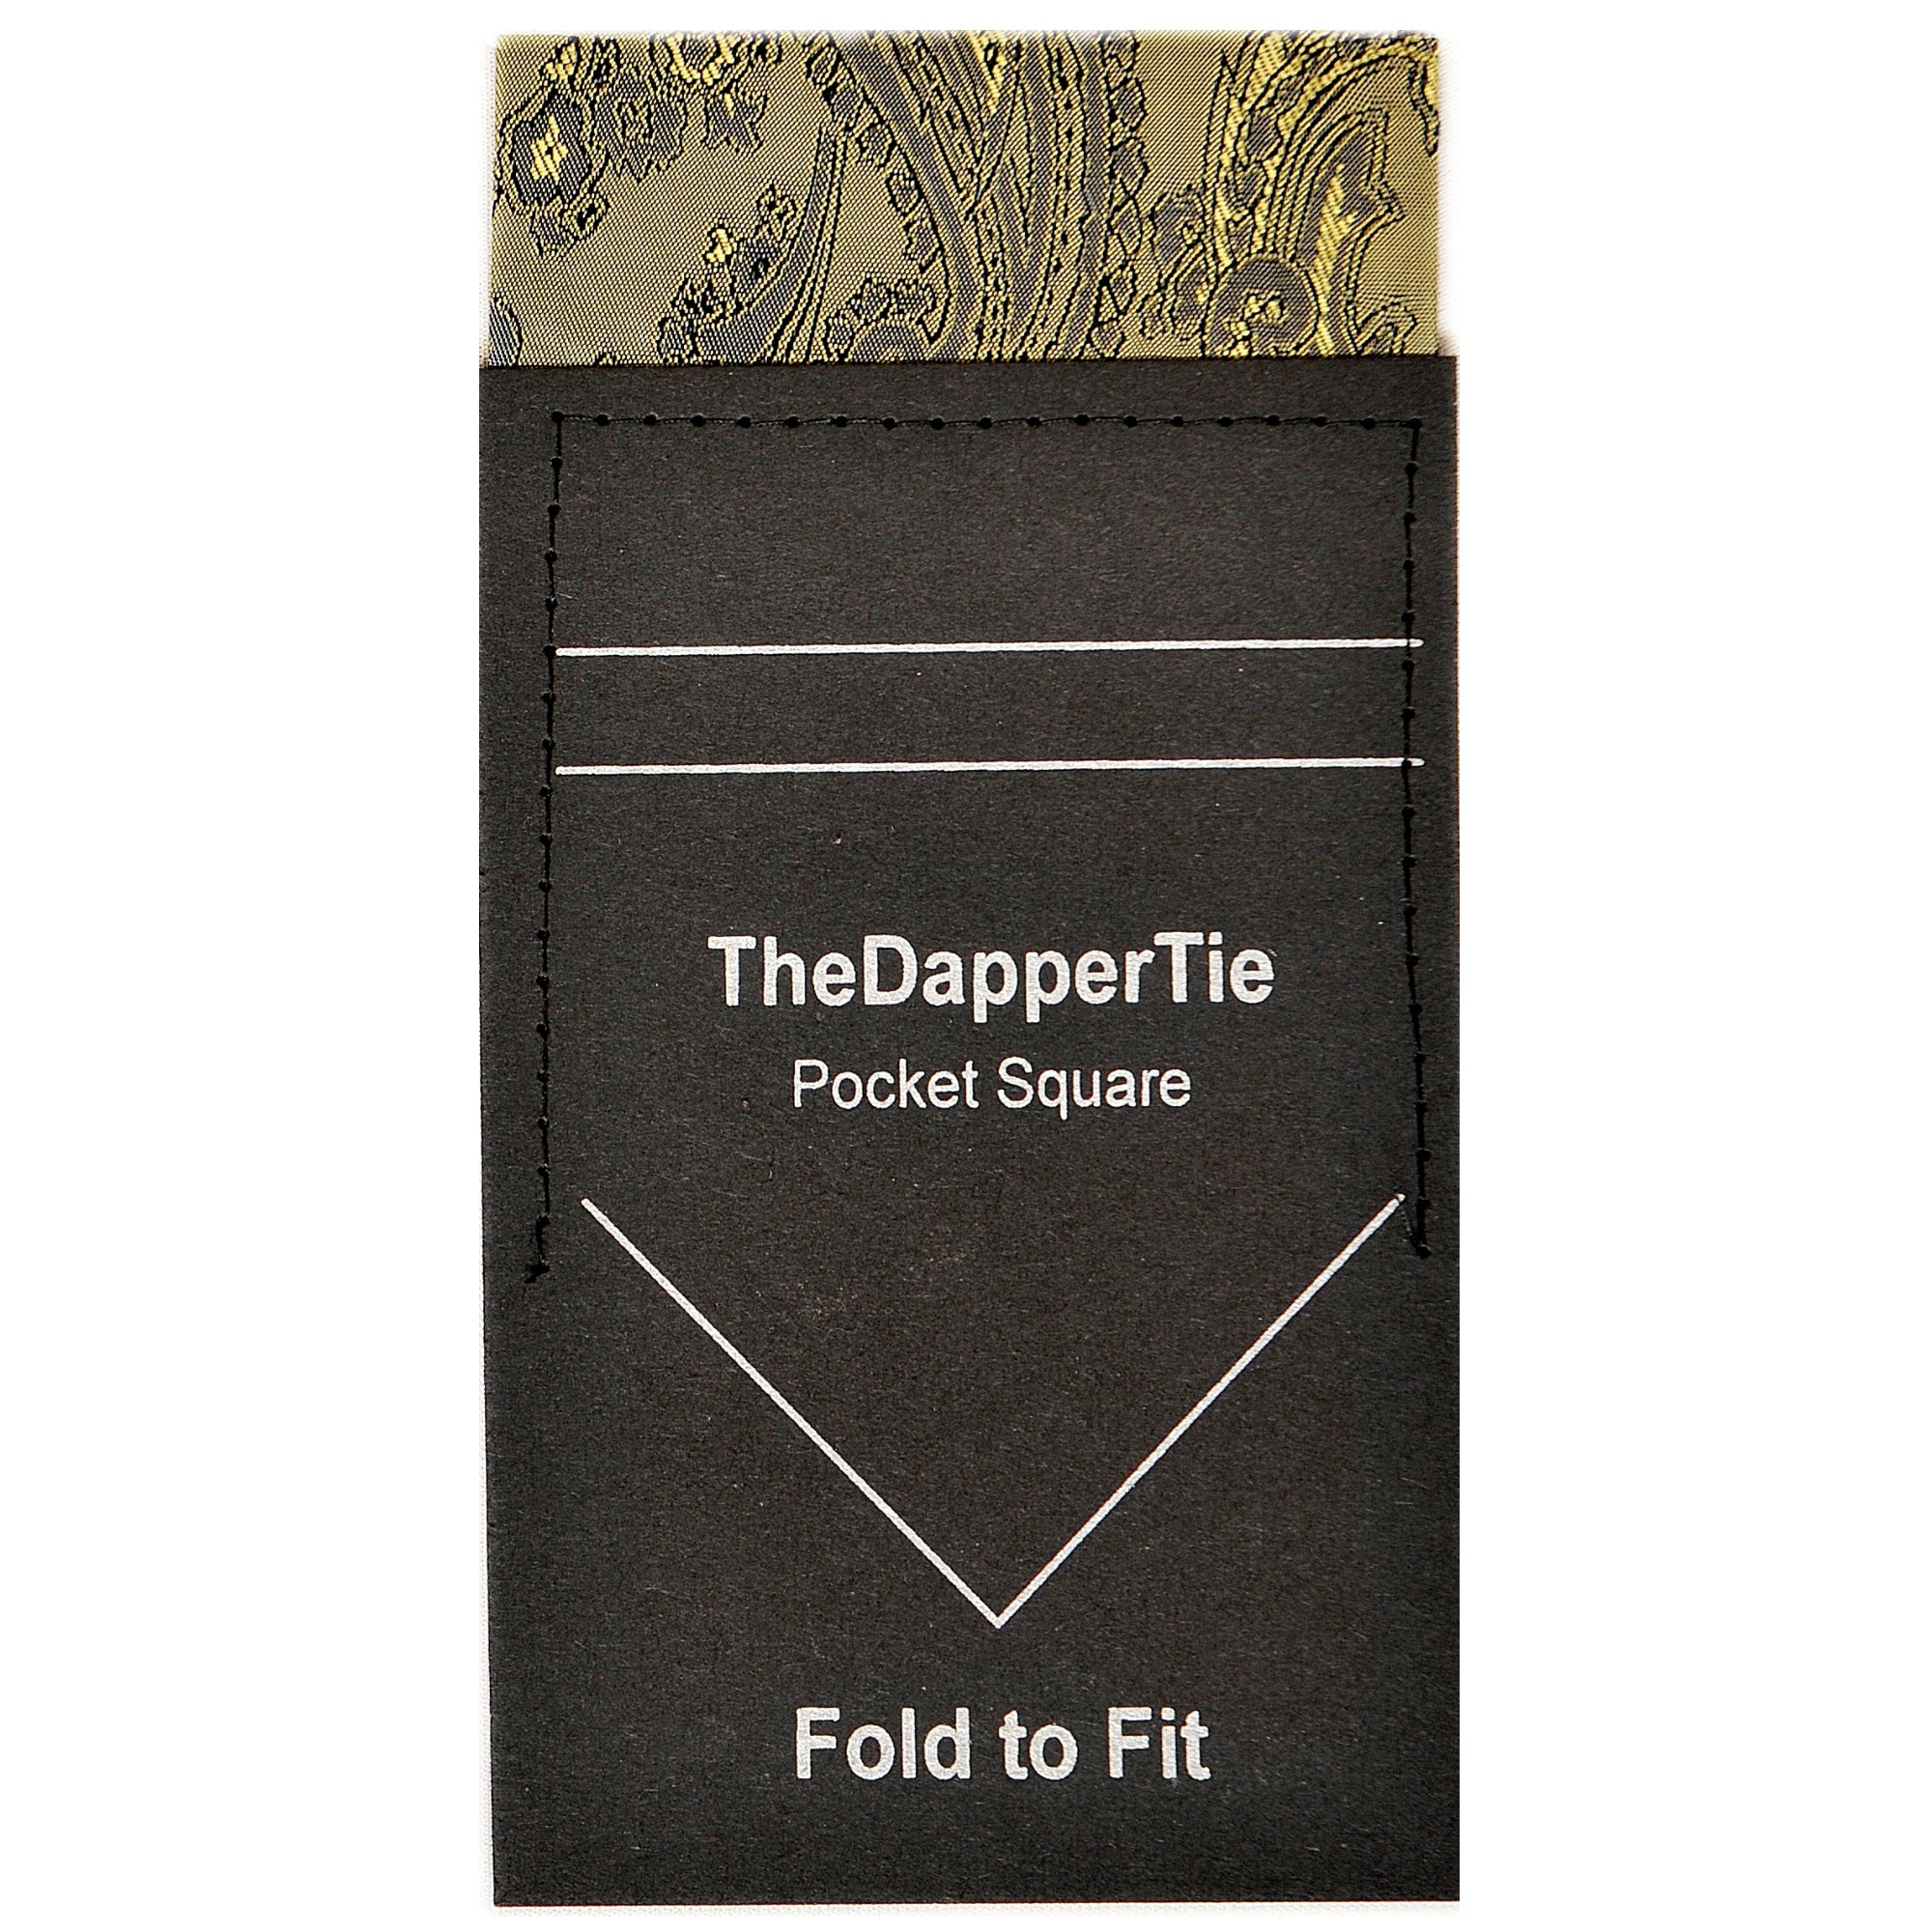 TheDapperTie - New Men's Paisley Flat Pre Folded Pocket Square on Card Prefolded Pocket Squares TheDapperTie Gold & Navy Blue Regular 